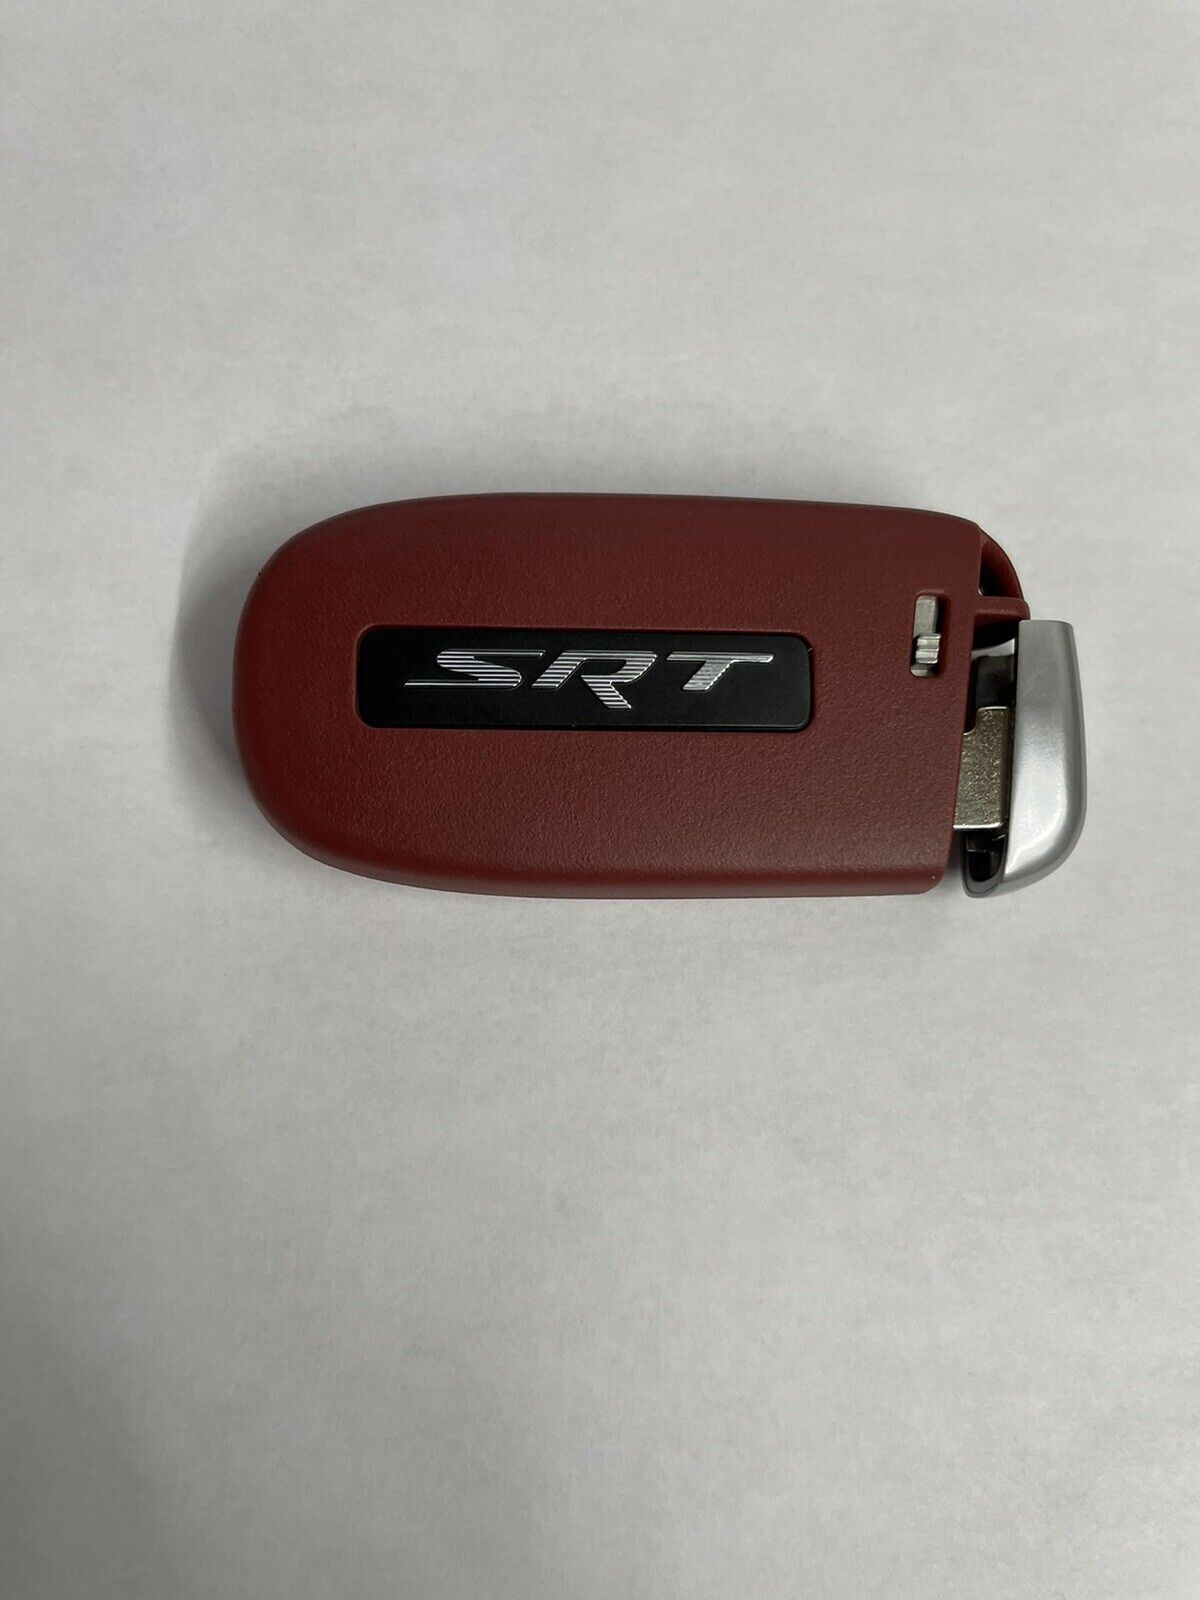 DODGE CHRYSLER JEEP SRT RED KEY SHELL 5 BUTTON WITH LOGO